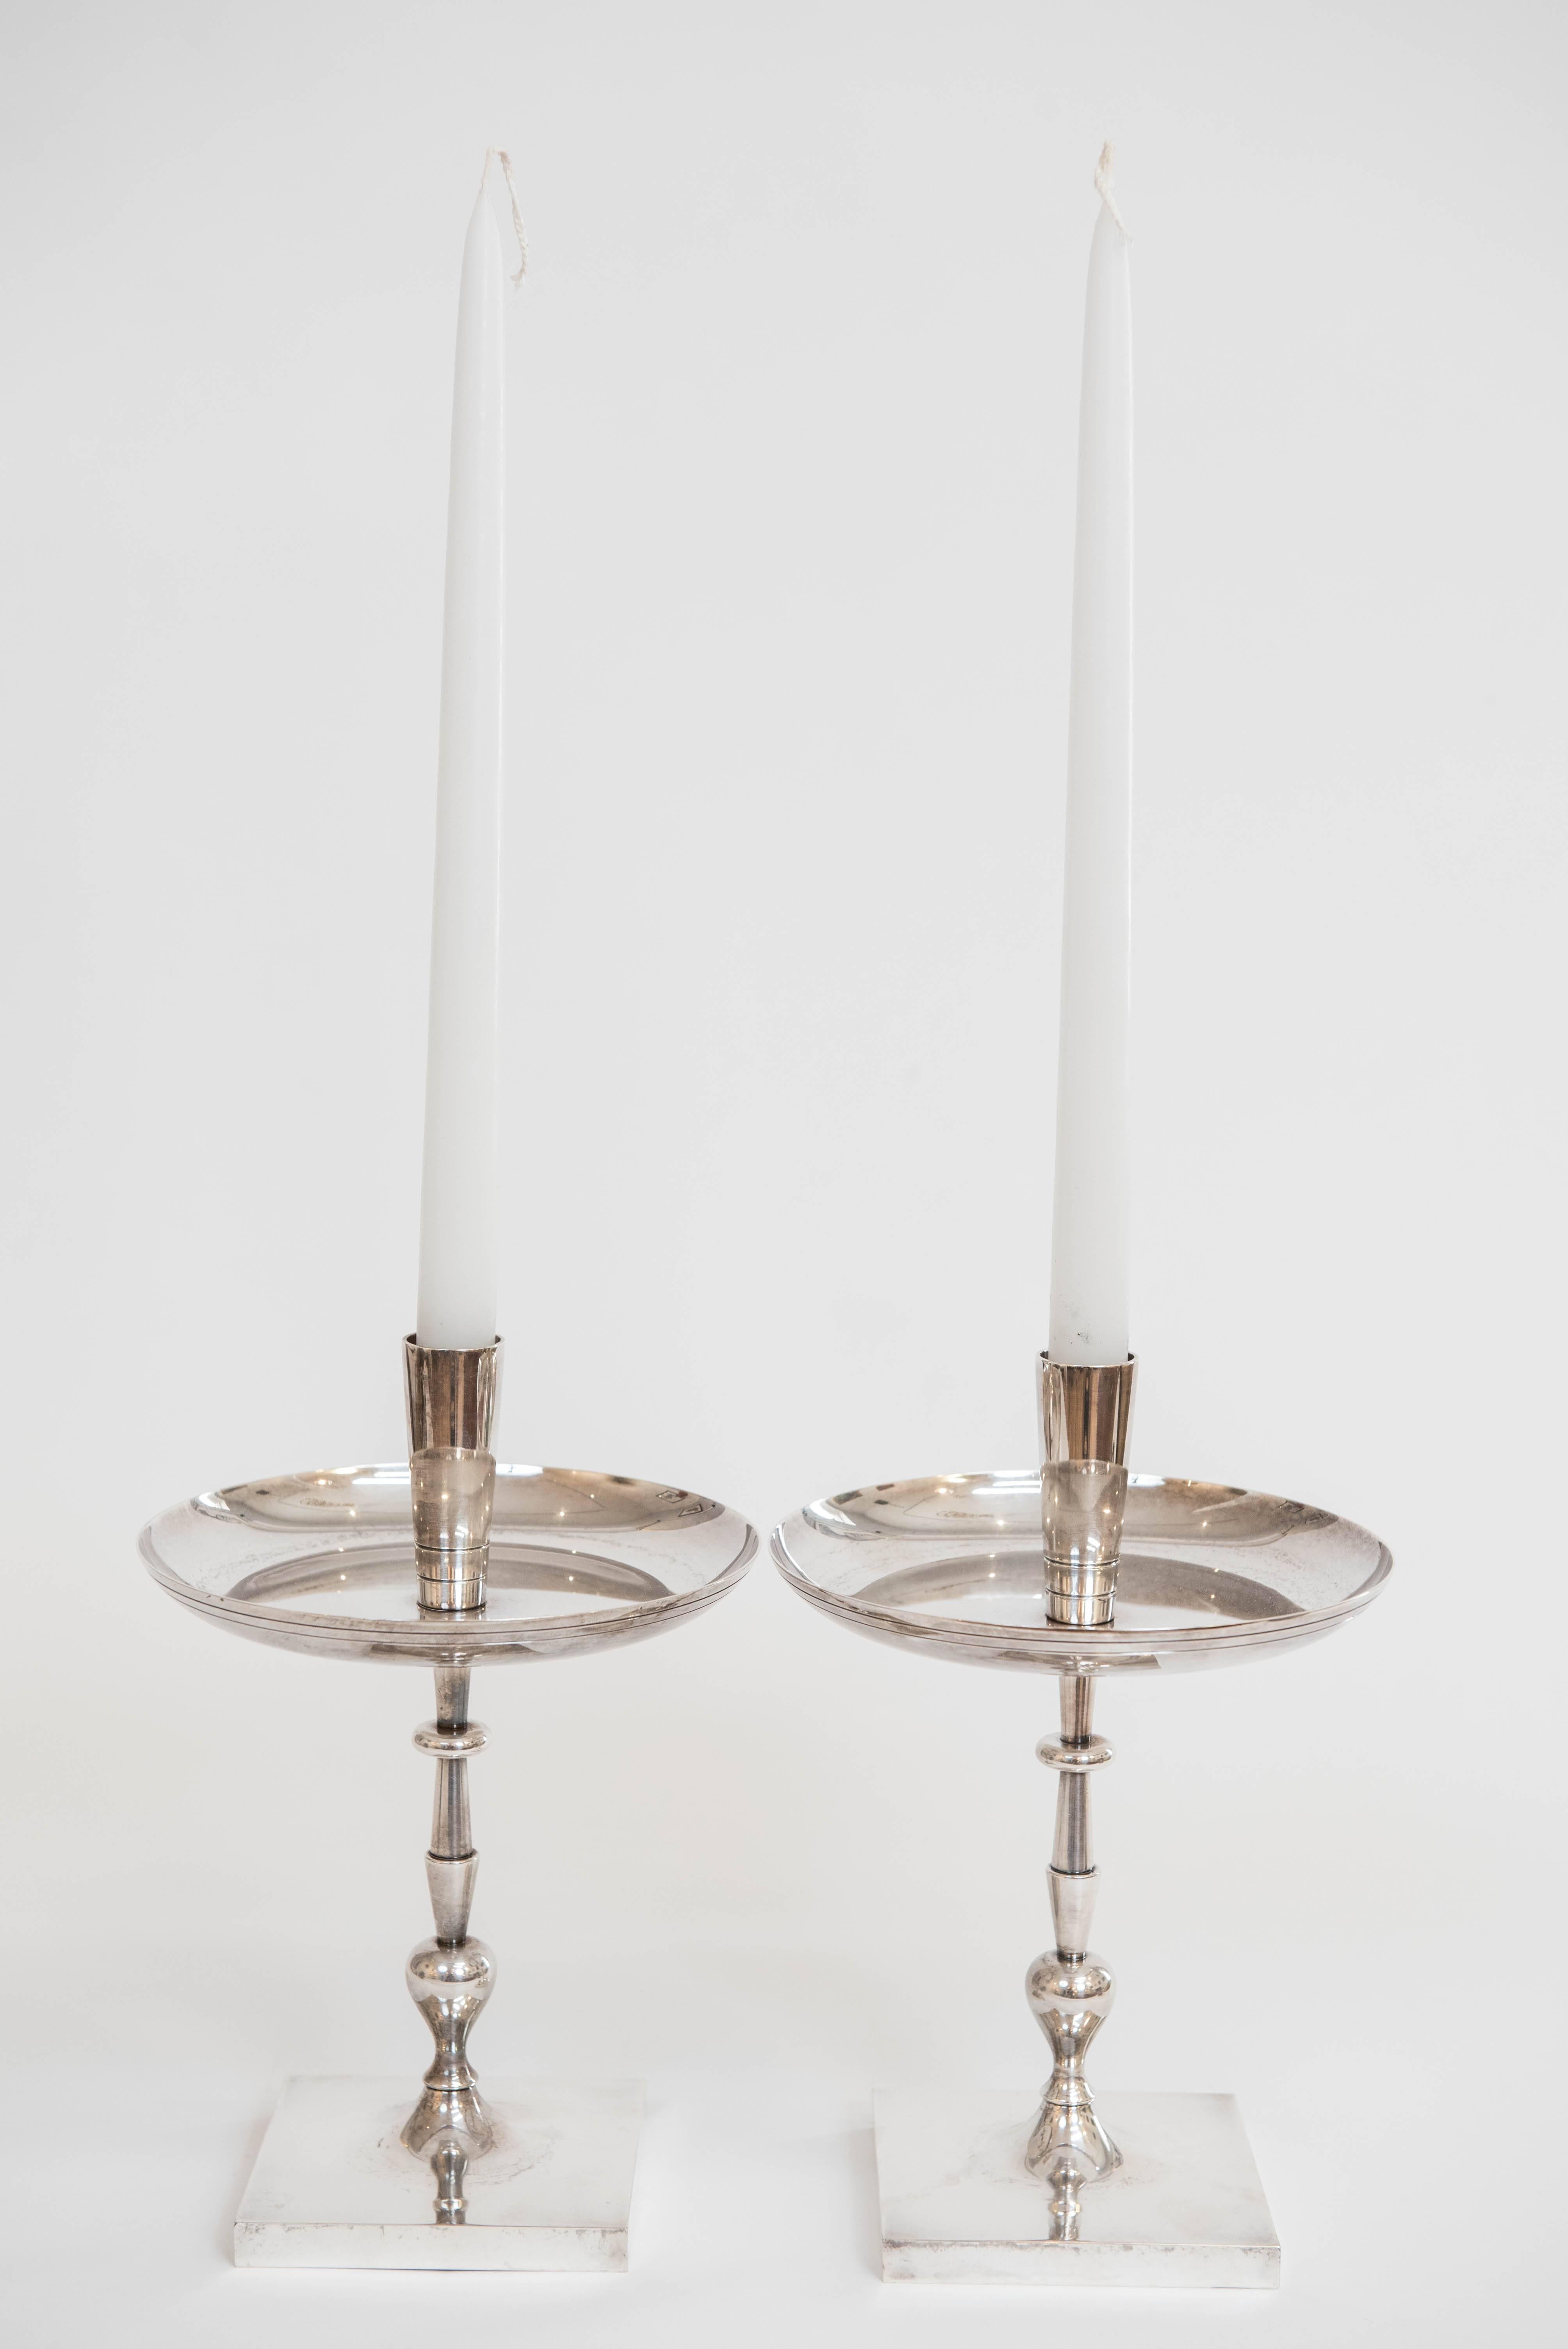 Add style and sophistication to your table with this impressive pair of single candle holders designed by Tommi Parzinger. Stamped HEIRLOOM 